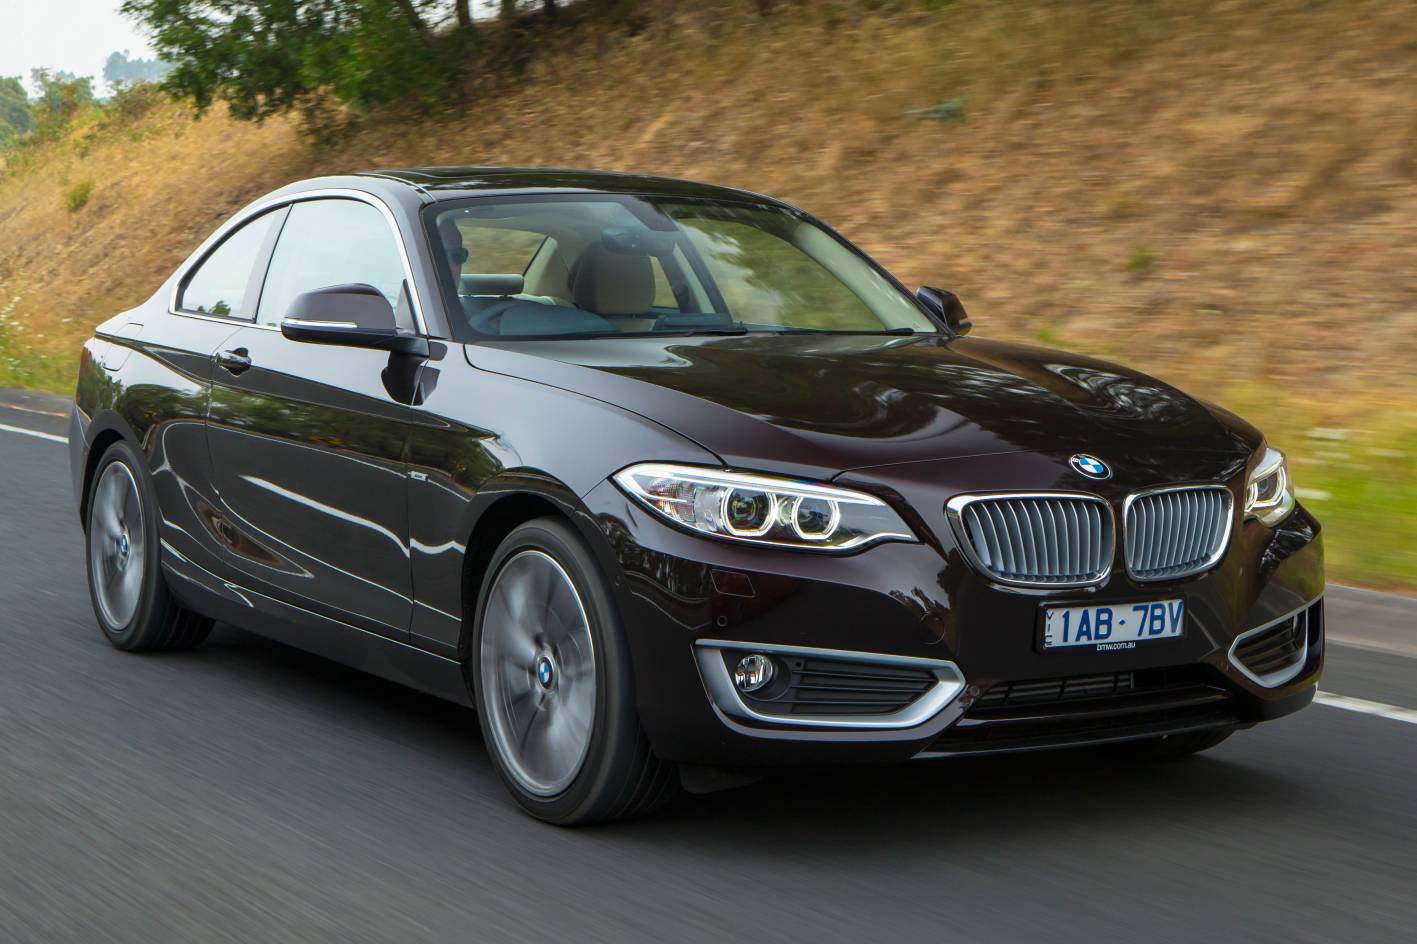 BMW 228i now on sale in Australia from $64,400